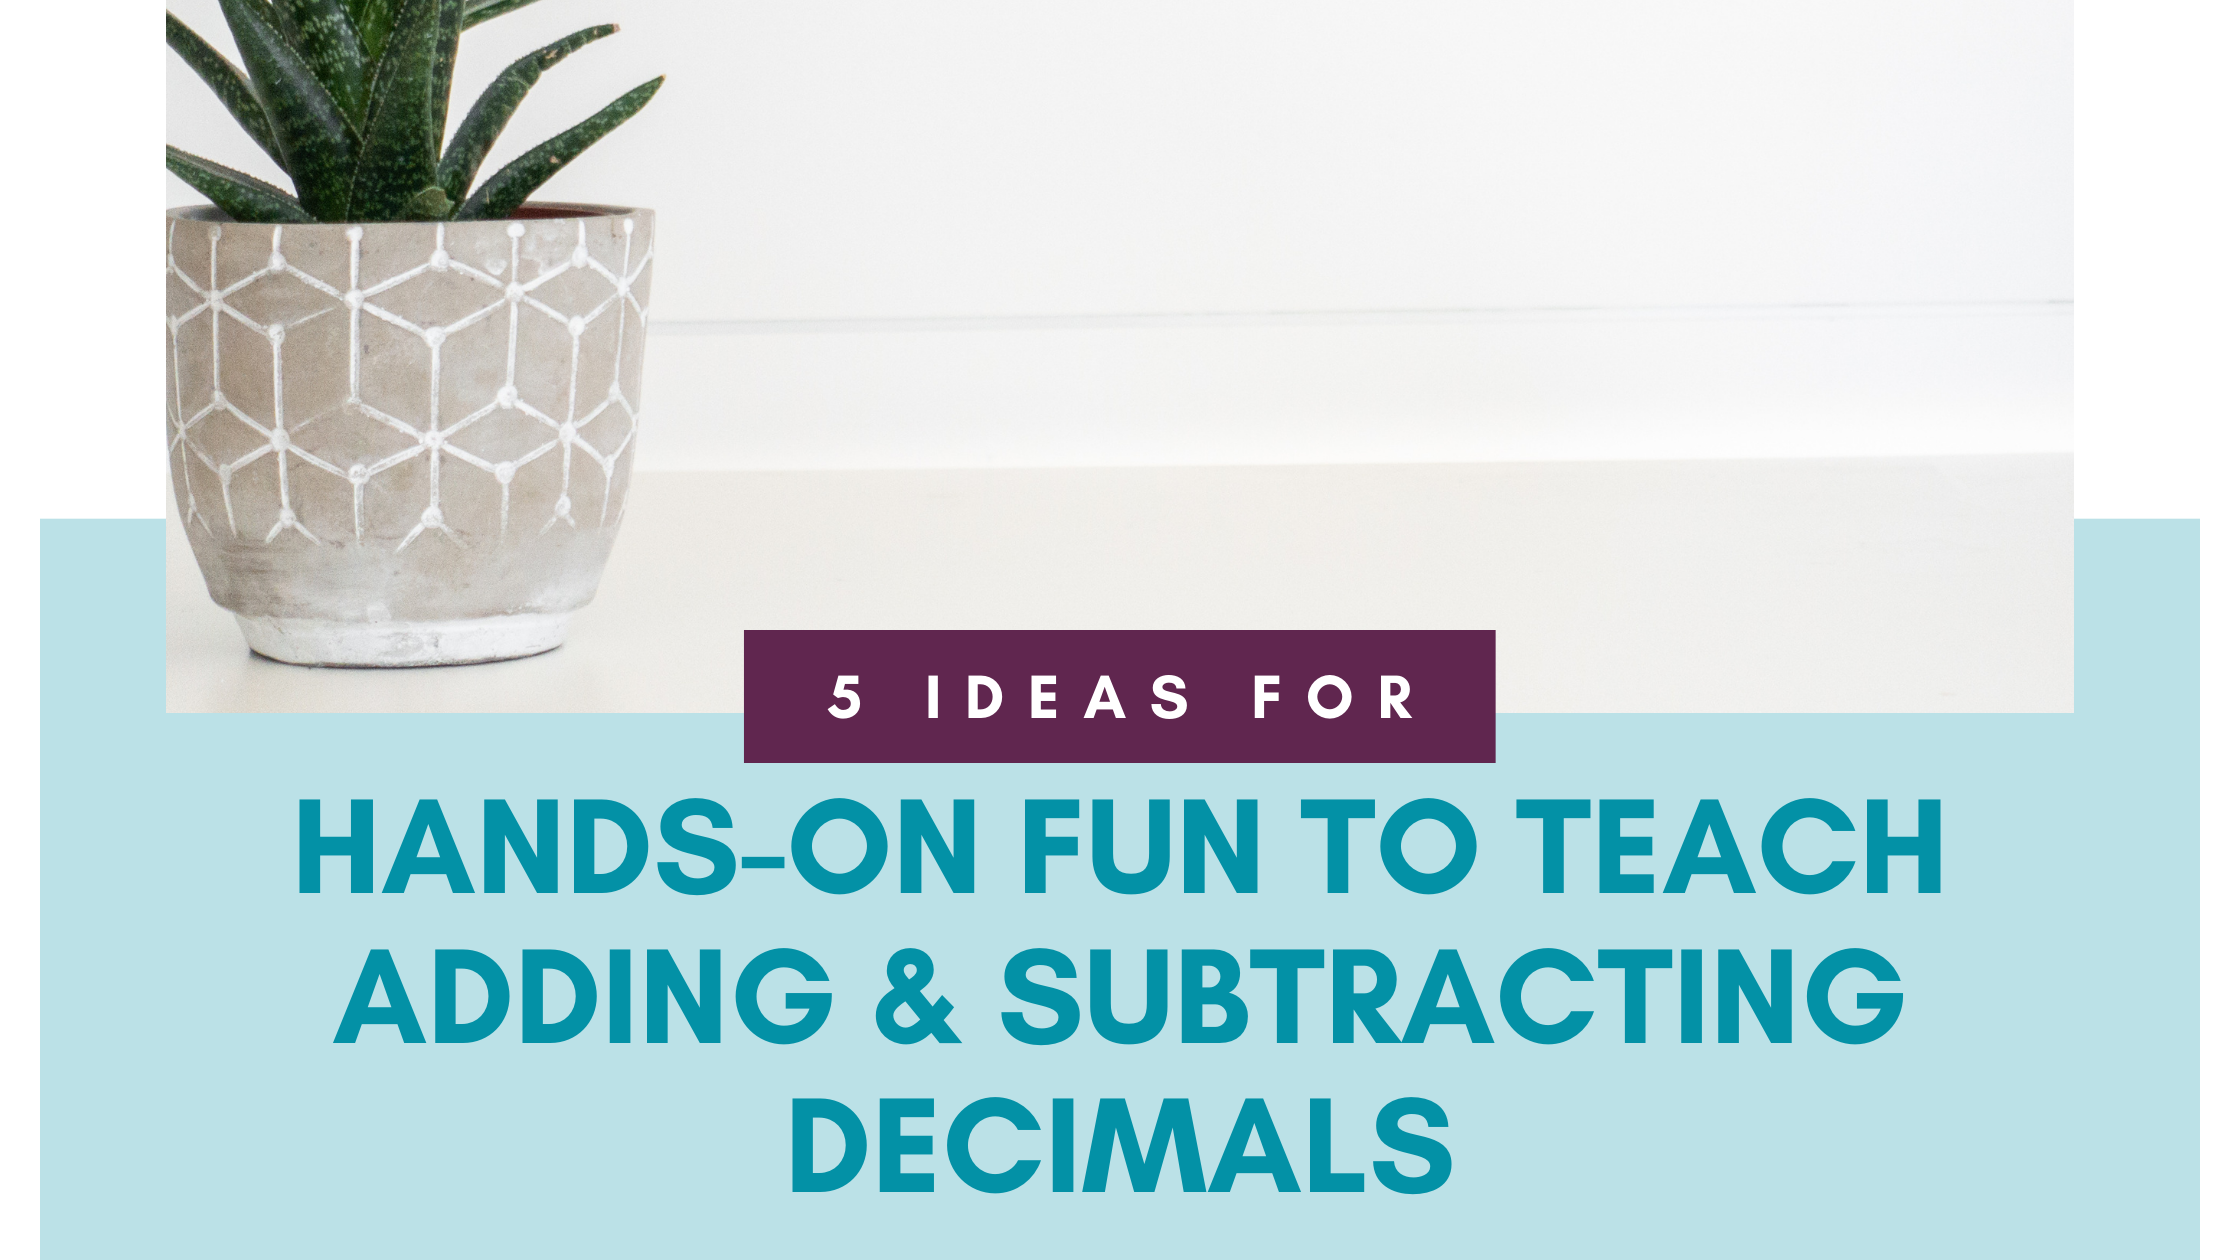 5 Ideas for Hands-on Fun to Teach Adding and Subtracting Decimals Blog Post Header Image